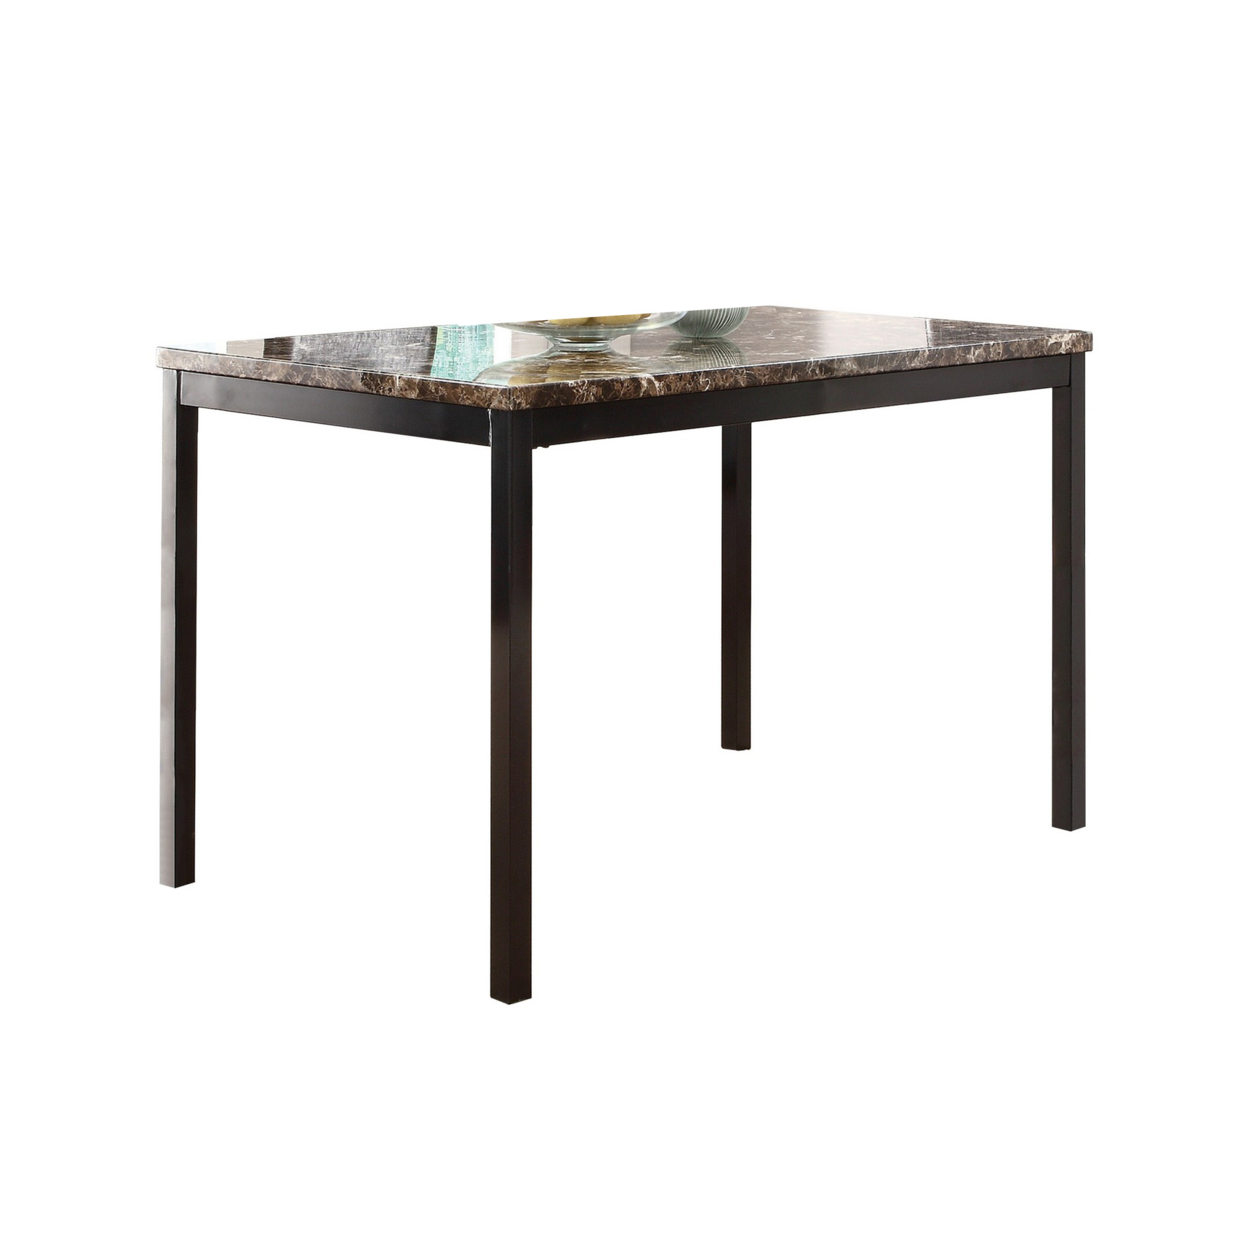 Faux Marble Top Dining Table With Metal Straight Legs, Brown And Black- Saltoro Sherpi